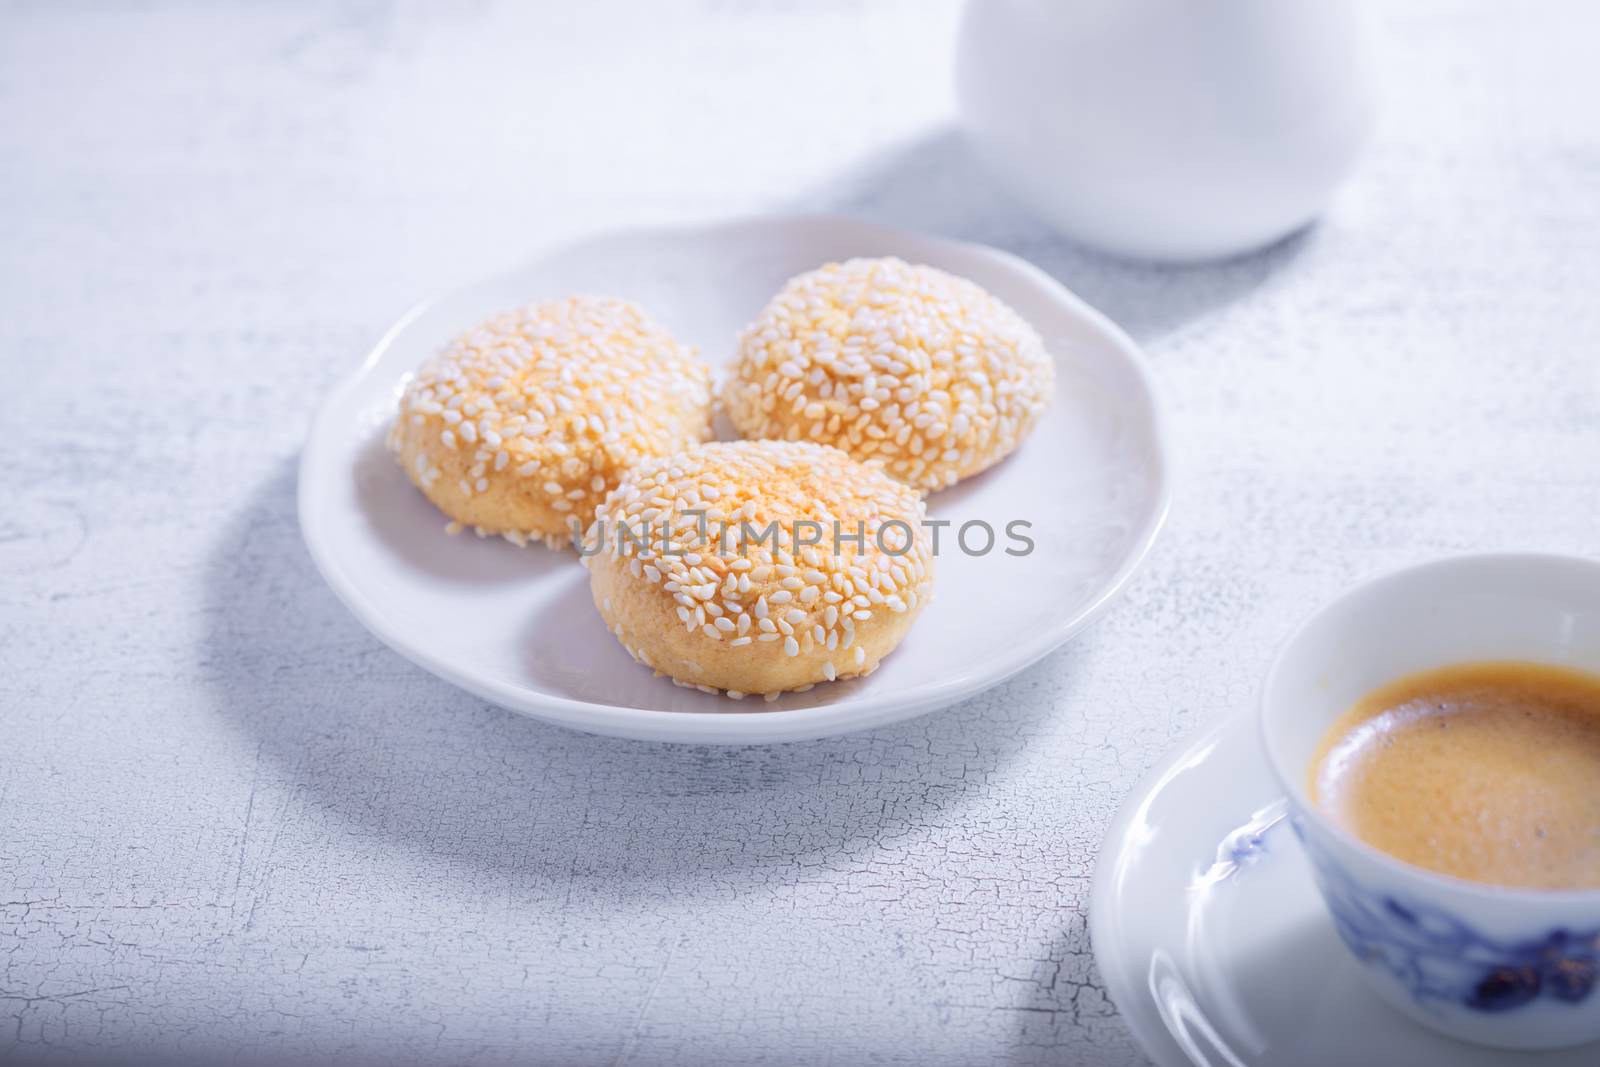 Almonds cookies with coffee by supercat67